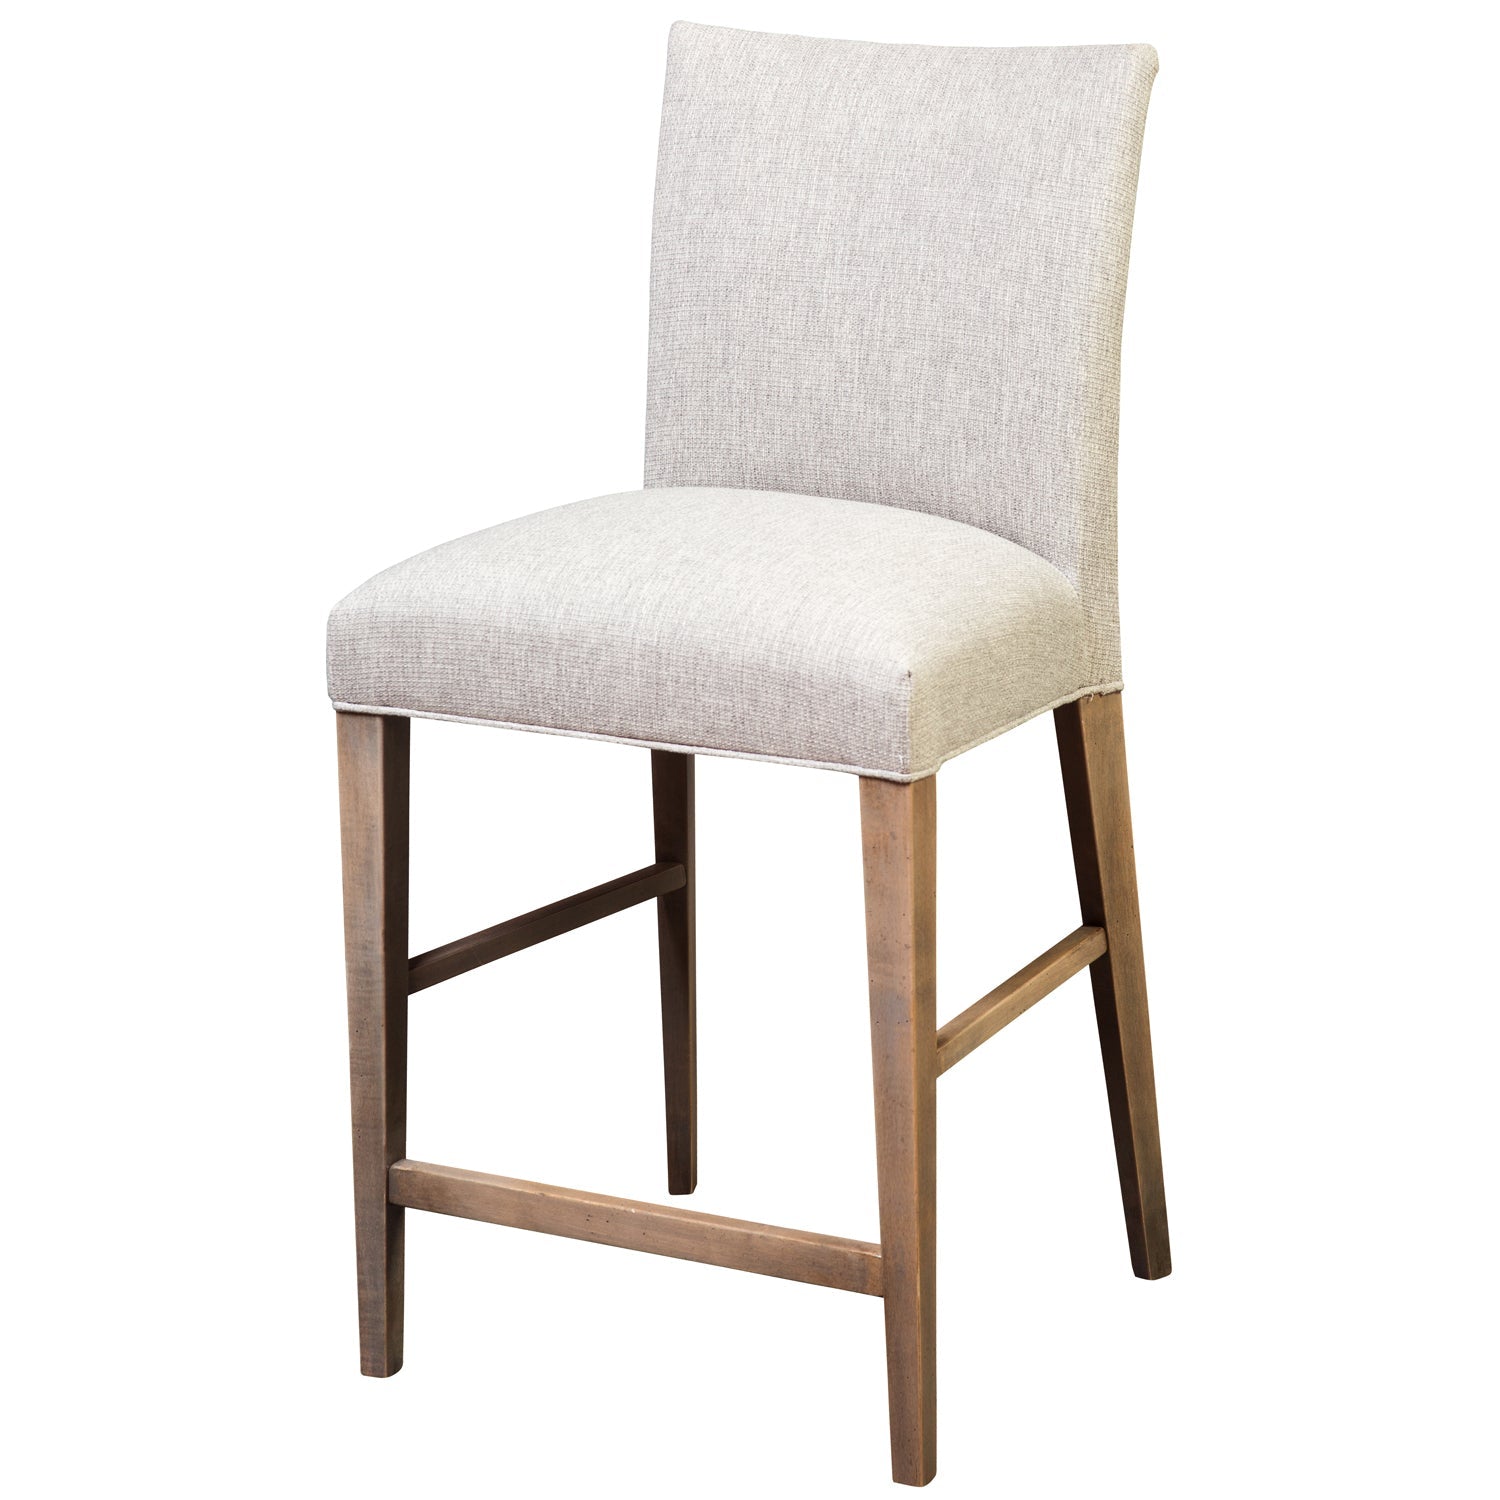 Andover Stool - snyders.furniture